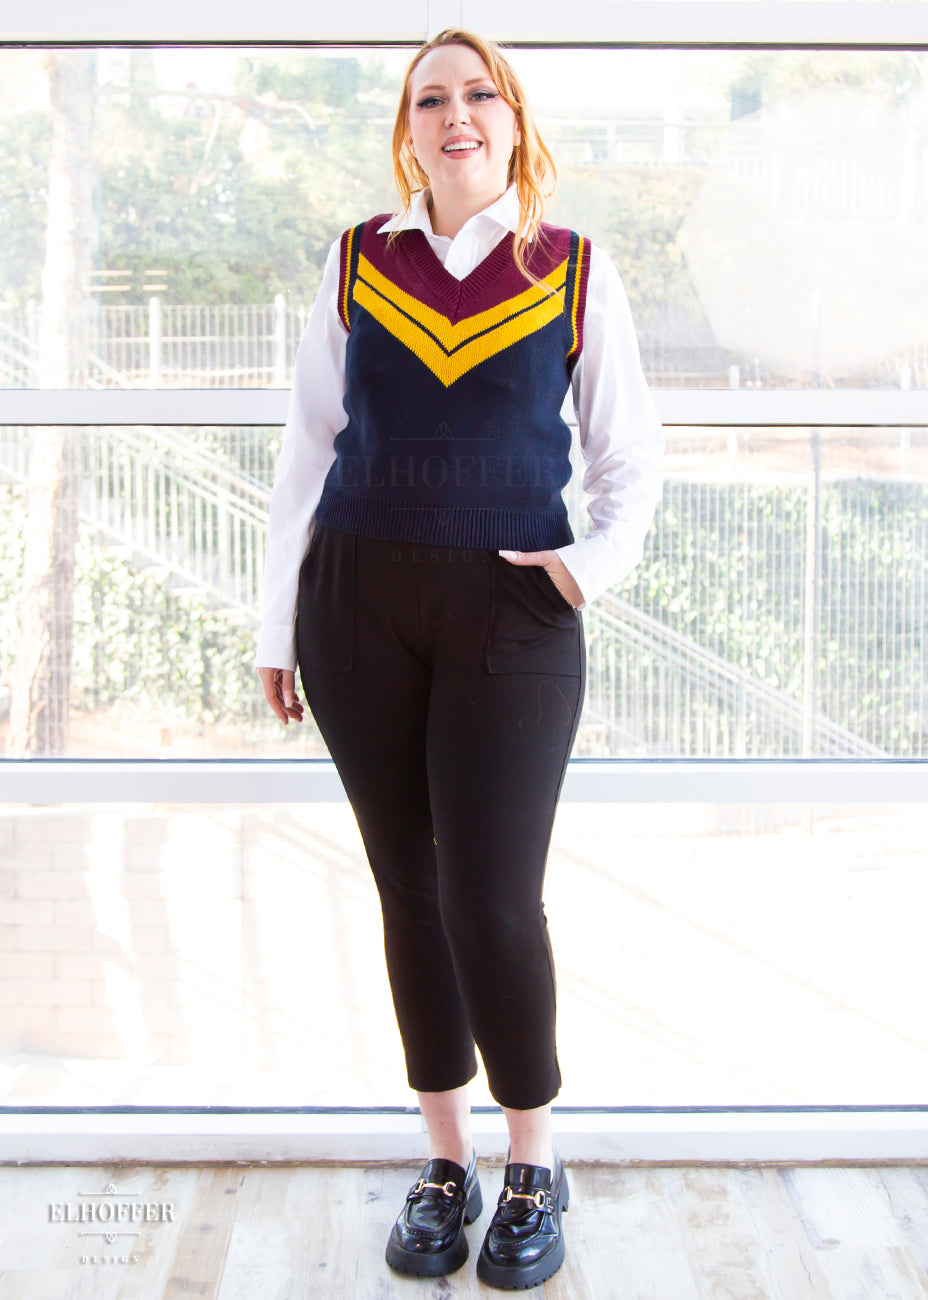 Kelsey, a size small model with long ginger hair, is wearing a pullover vest with a boxy fit and v-neck. It is navy blue with a deep red neckline and mustard yellow v detail.